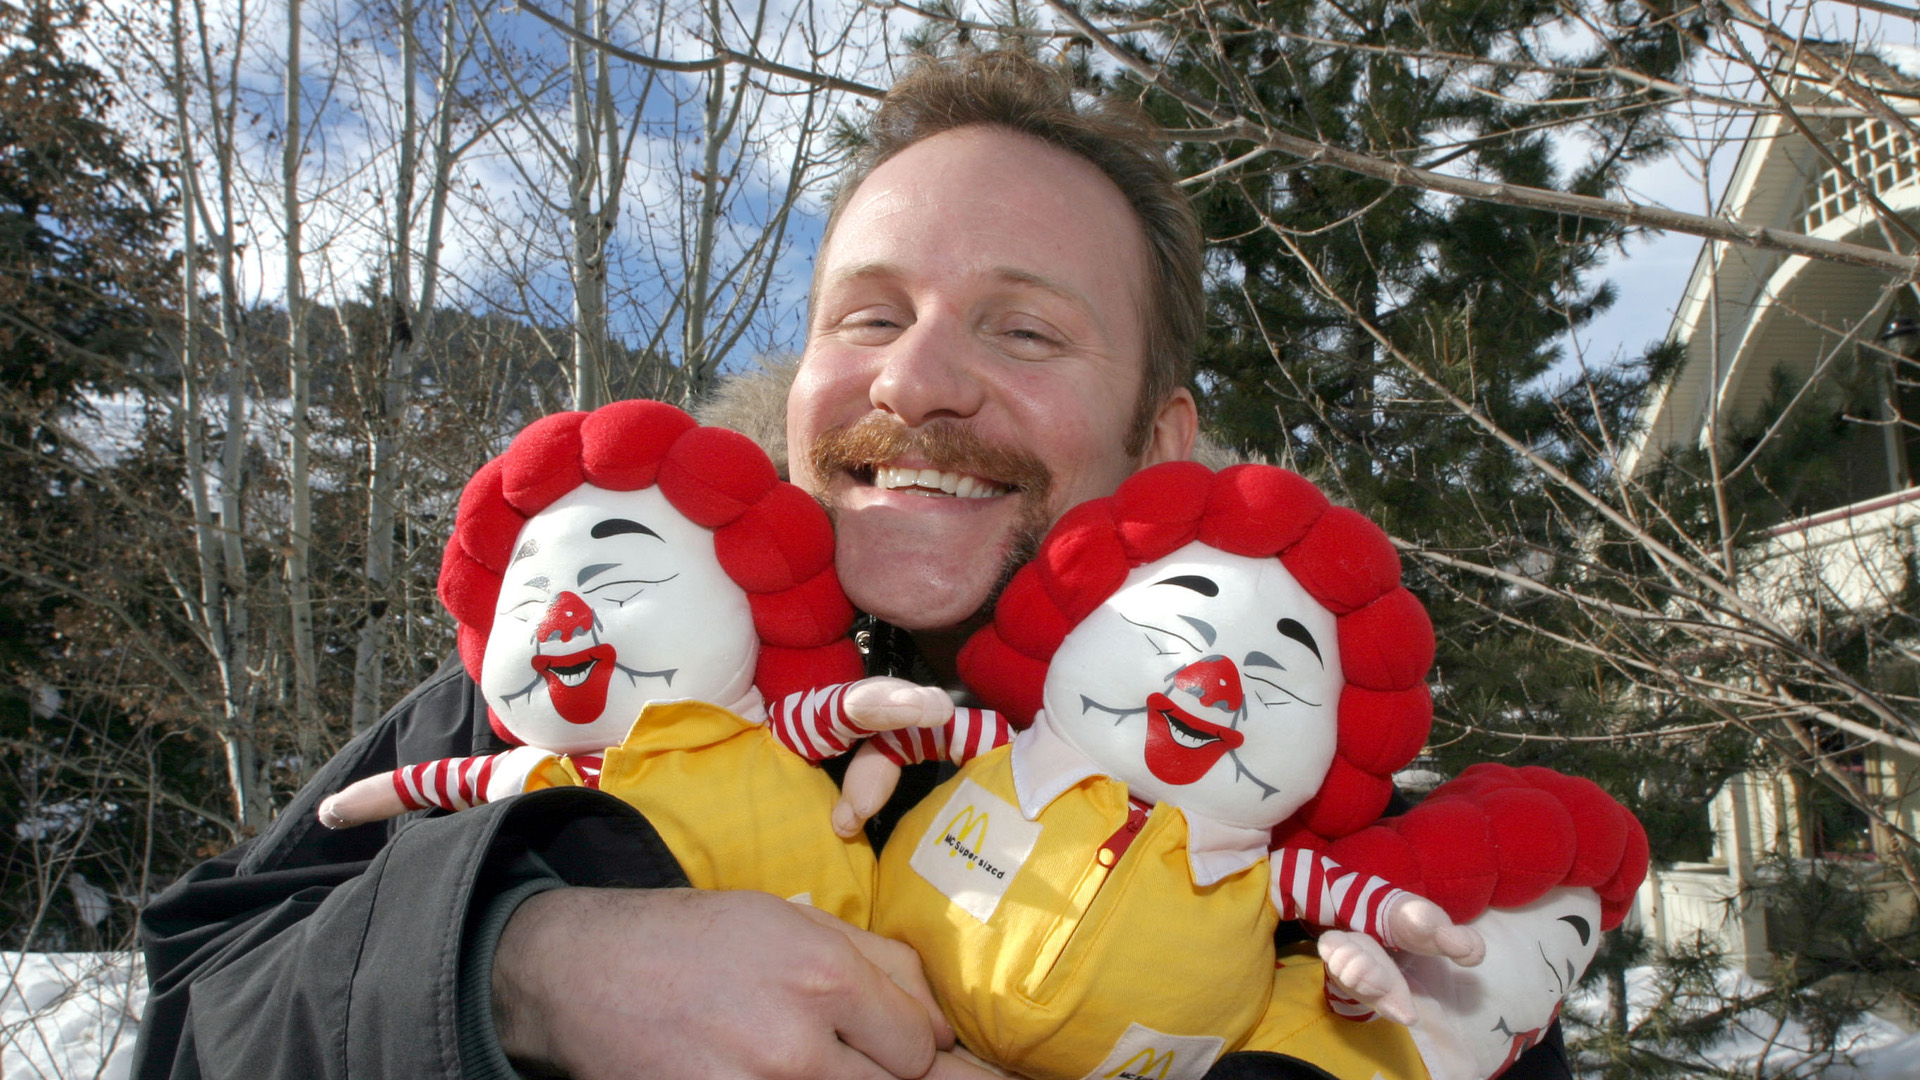 Morgan Spurlock Who Ate Mcdonalds Every Day For A Month For Super Size Me Documentary Dies At 